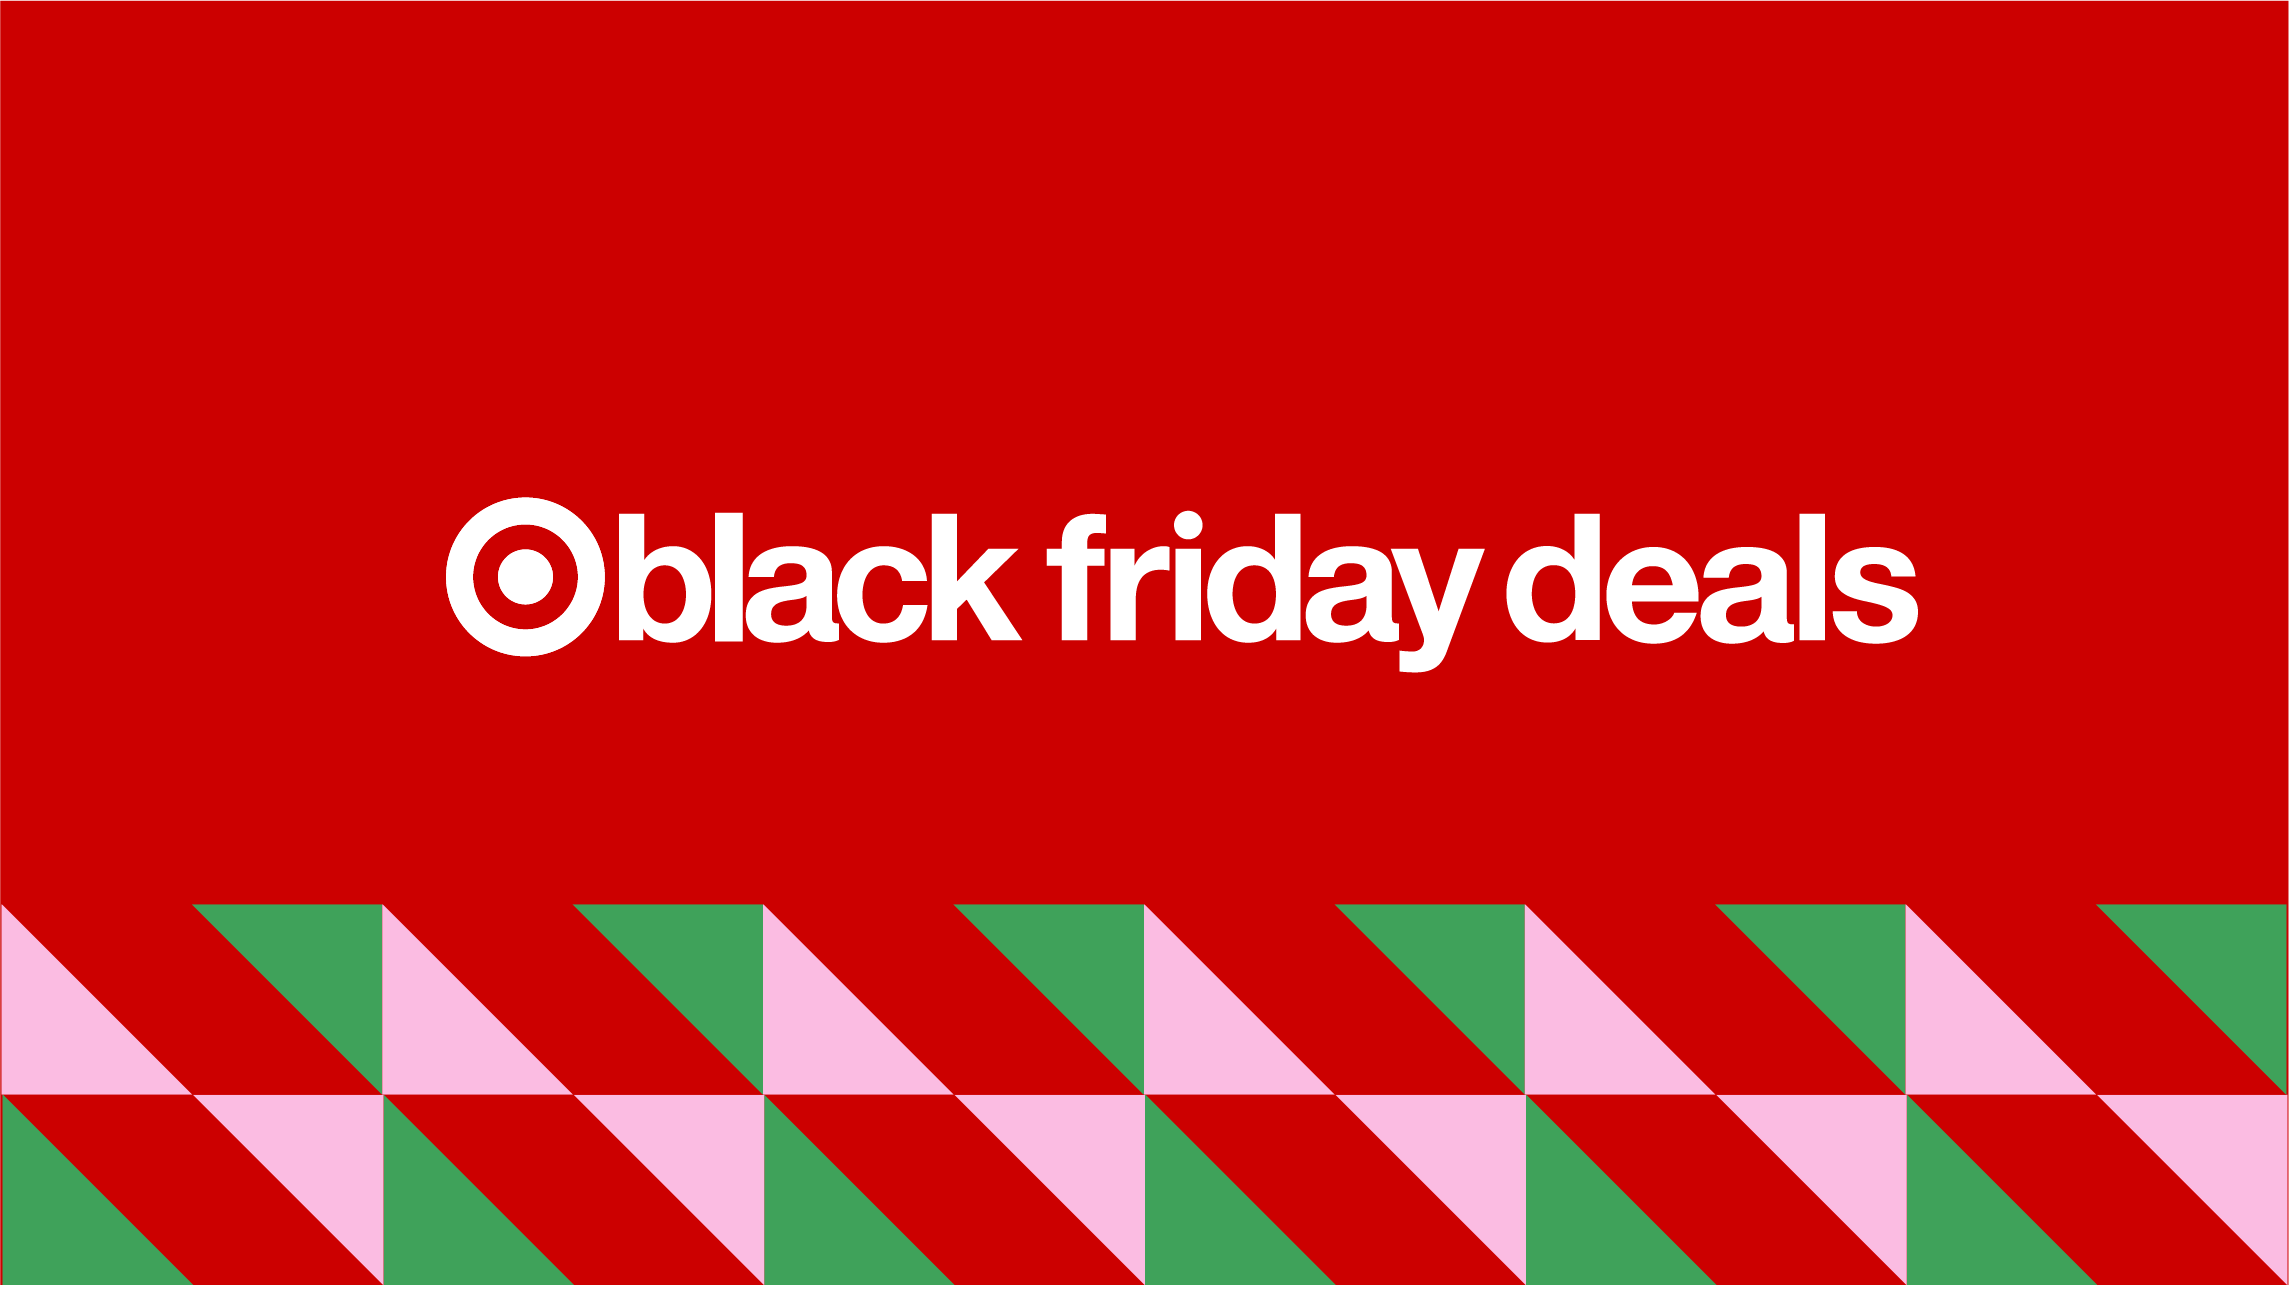 Target's Simple, Yet Effective Black Friday Catalog Focuses on